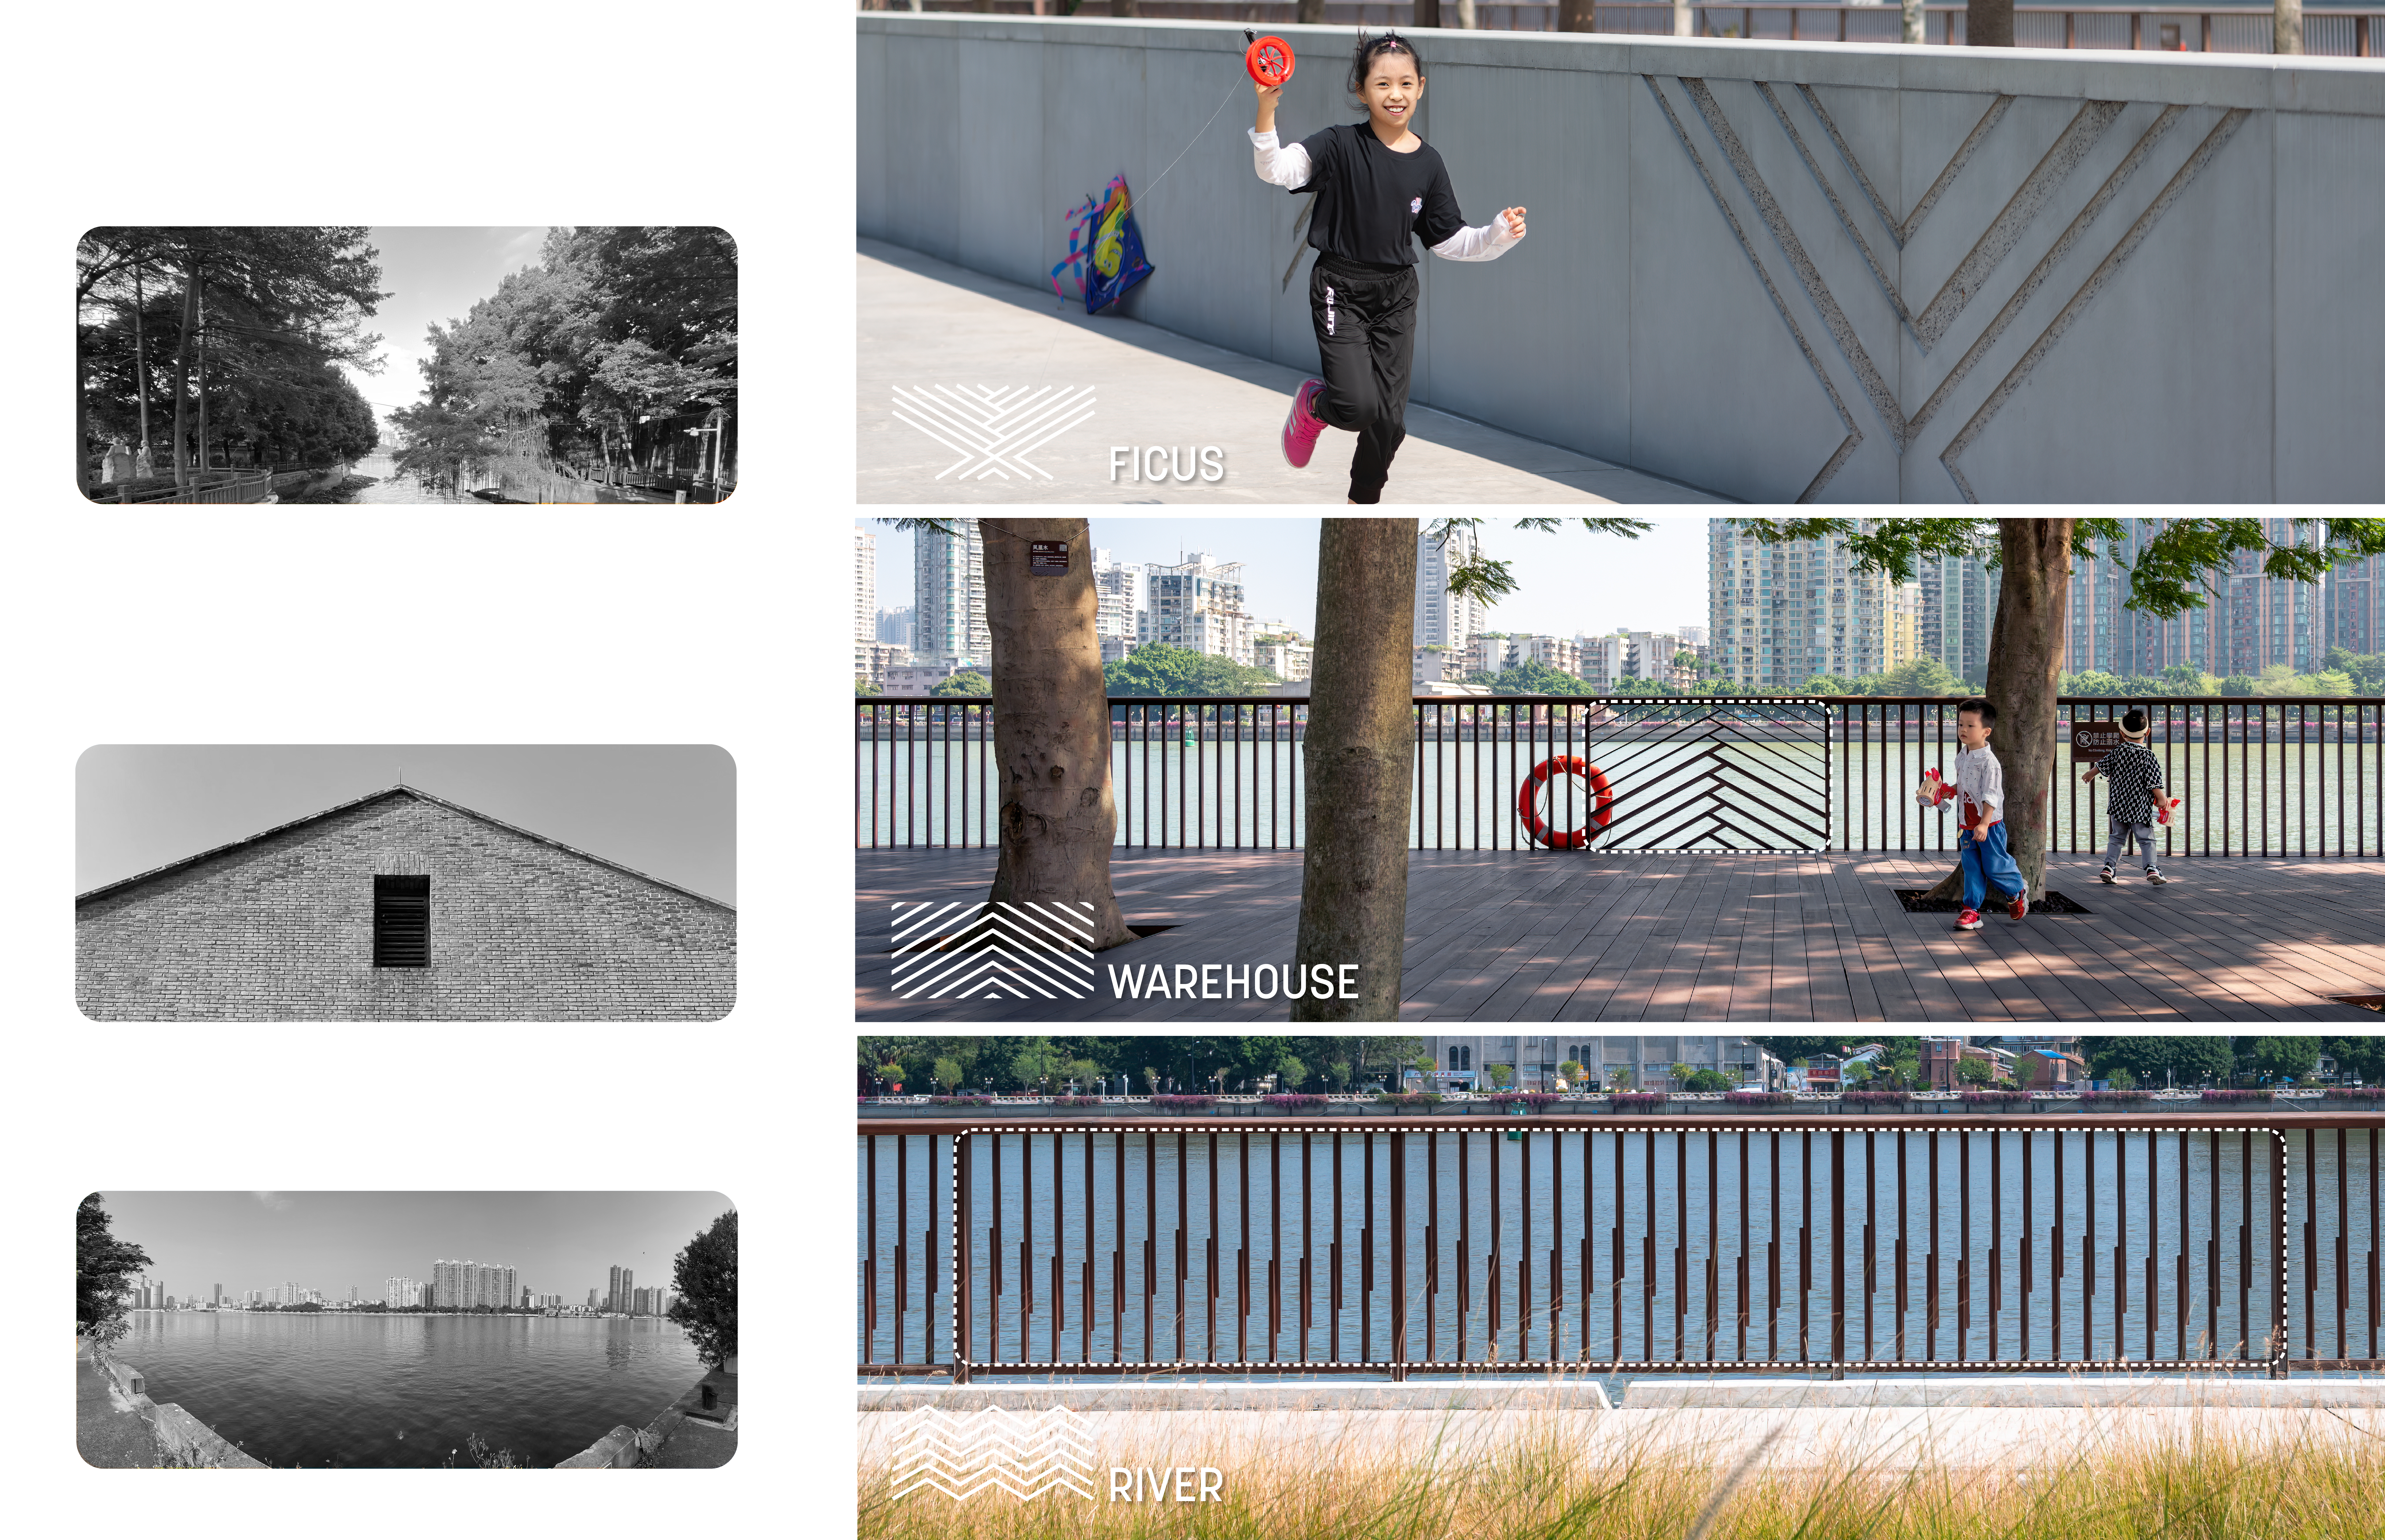 image collage showing the application of patterns into the floodwall and railing designs